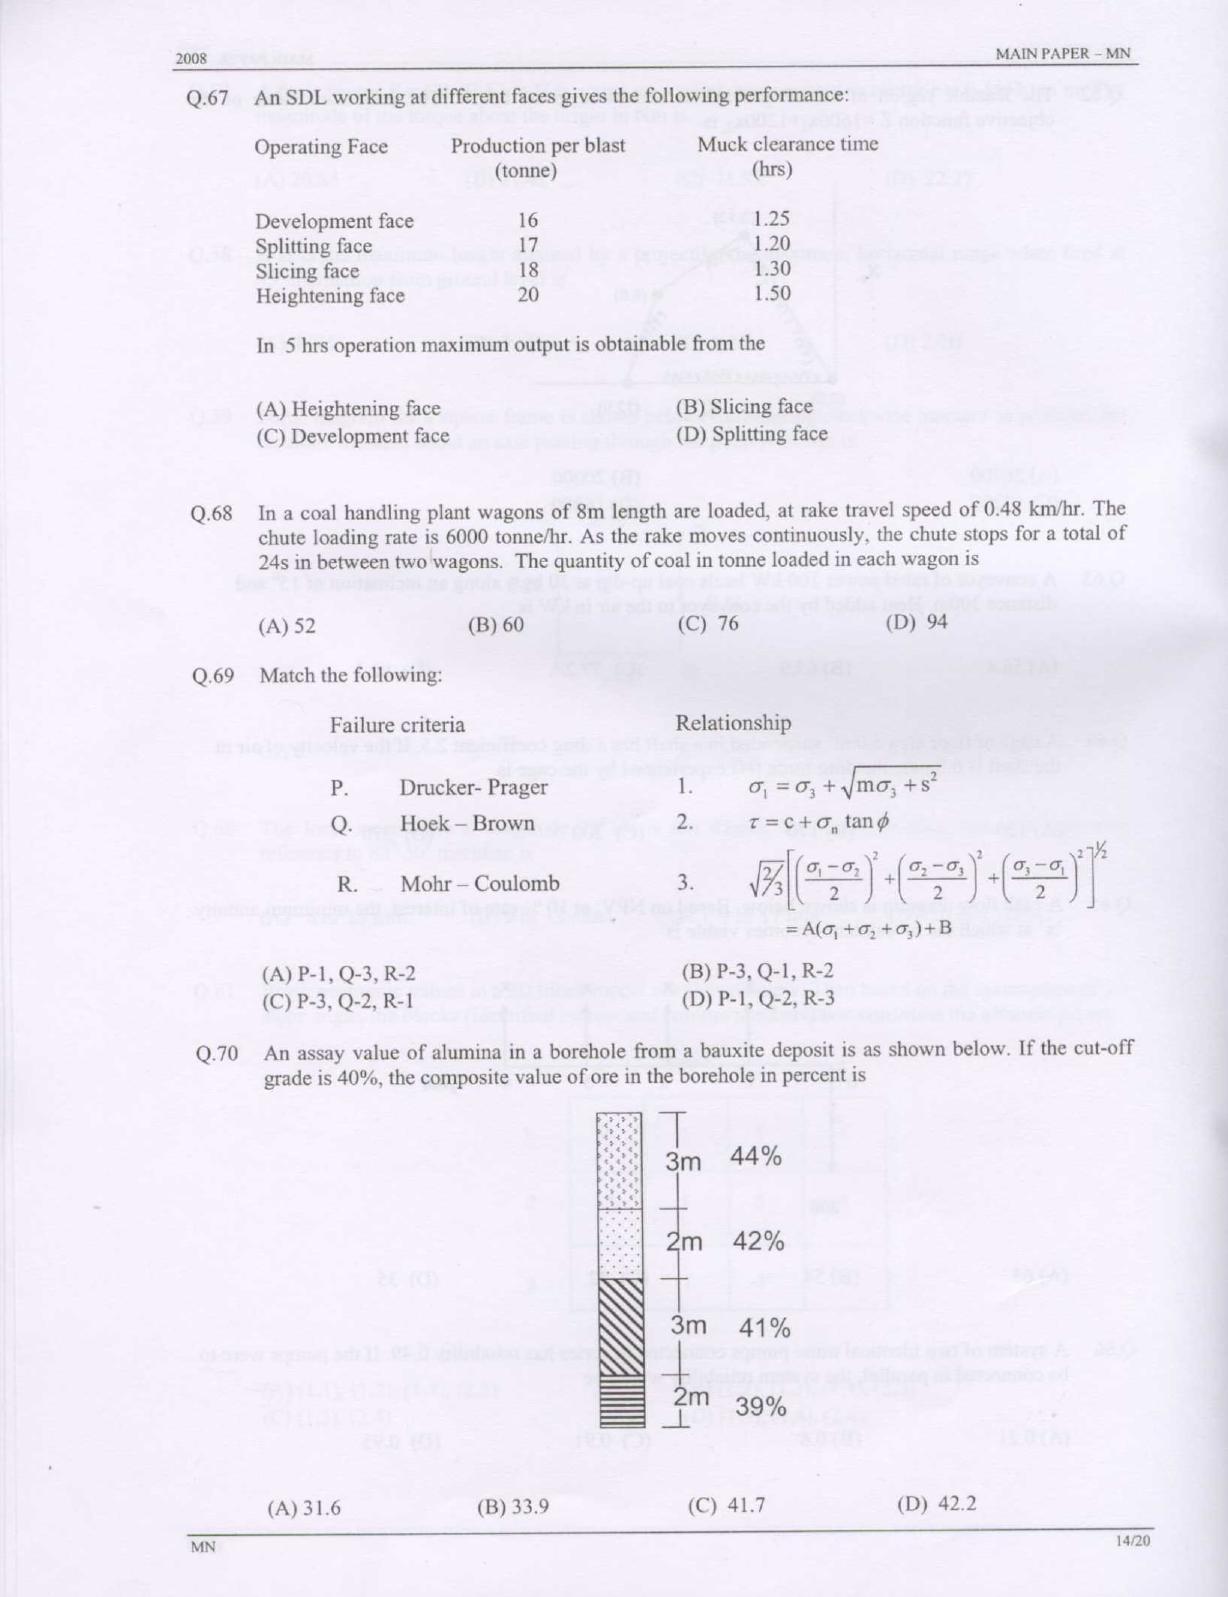 GATE 2008 Mining Engineering (MN) Question Paper with Answer Key - Page 14